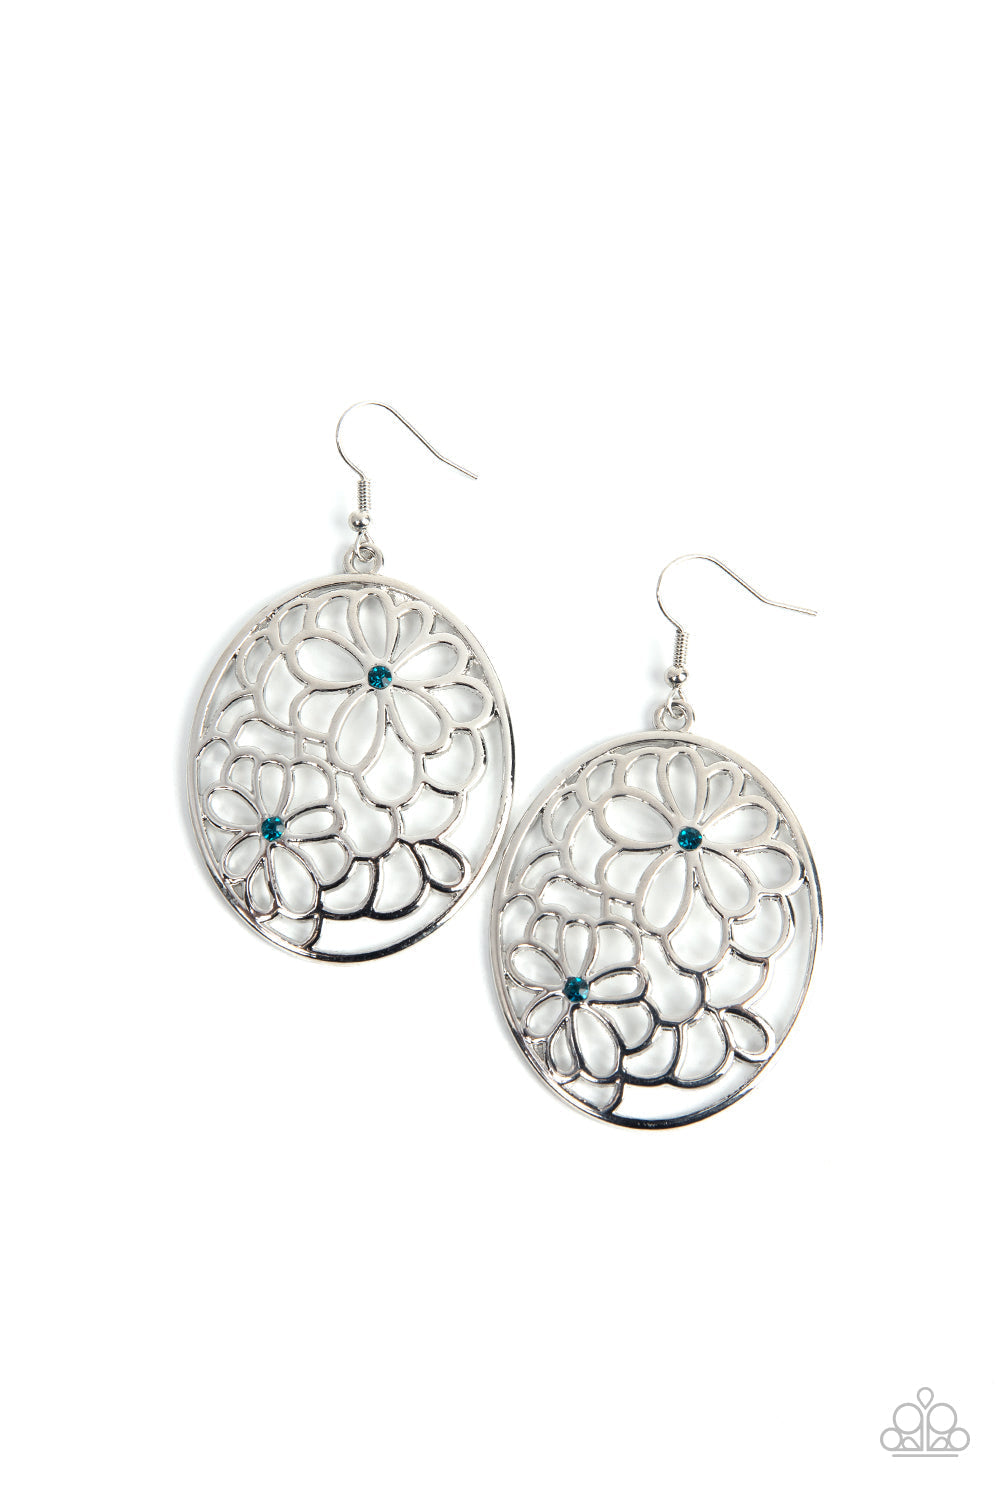 Meadow Maiden - Blue and Silver Flower Earrings - Paparazzi Accessories - Sparkling blue rhinestones and silver flowers bloom inside a circular frame for a whimsically botanical display below the ear. Earring attaches to a standard fishhook fitting. Sold as one pair of earrings. 